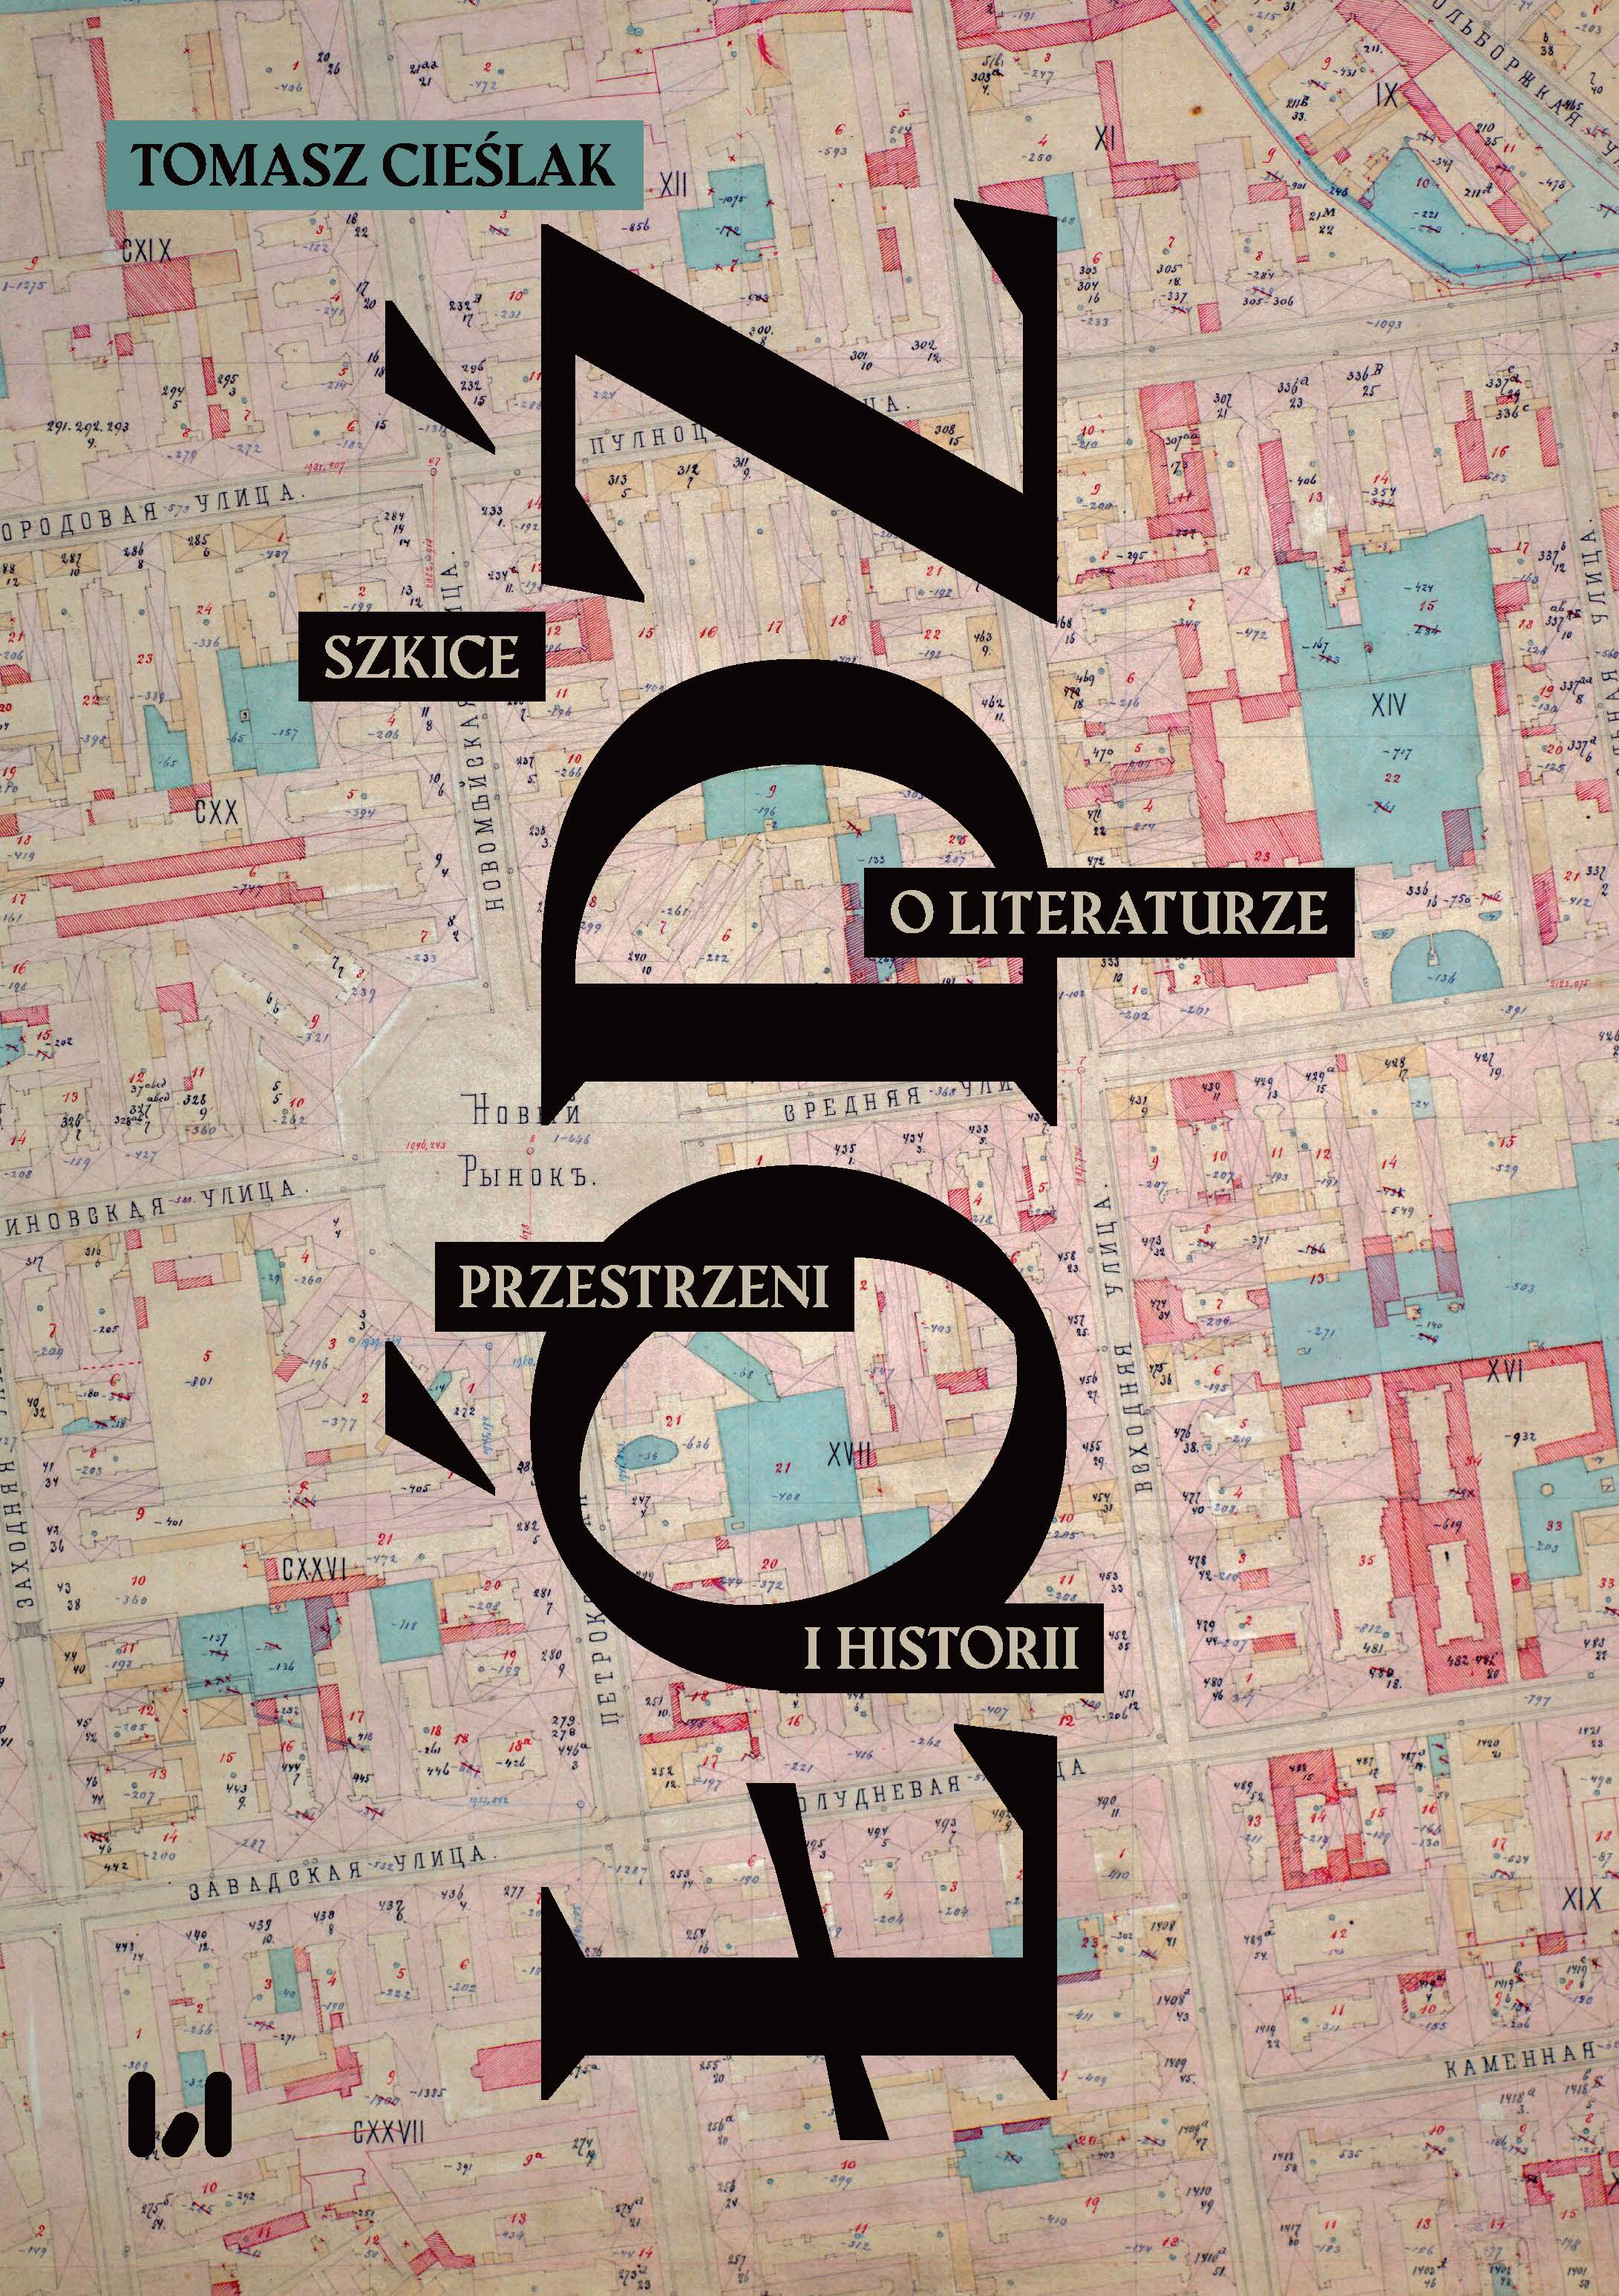 Łódź. Essays on literature, space and history